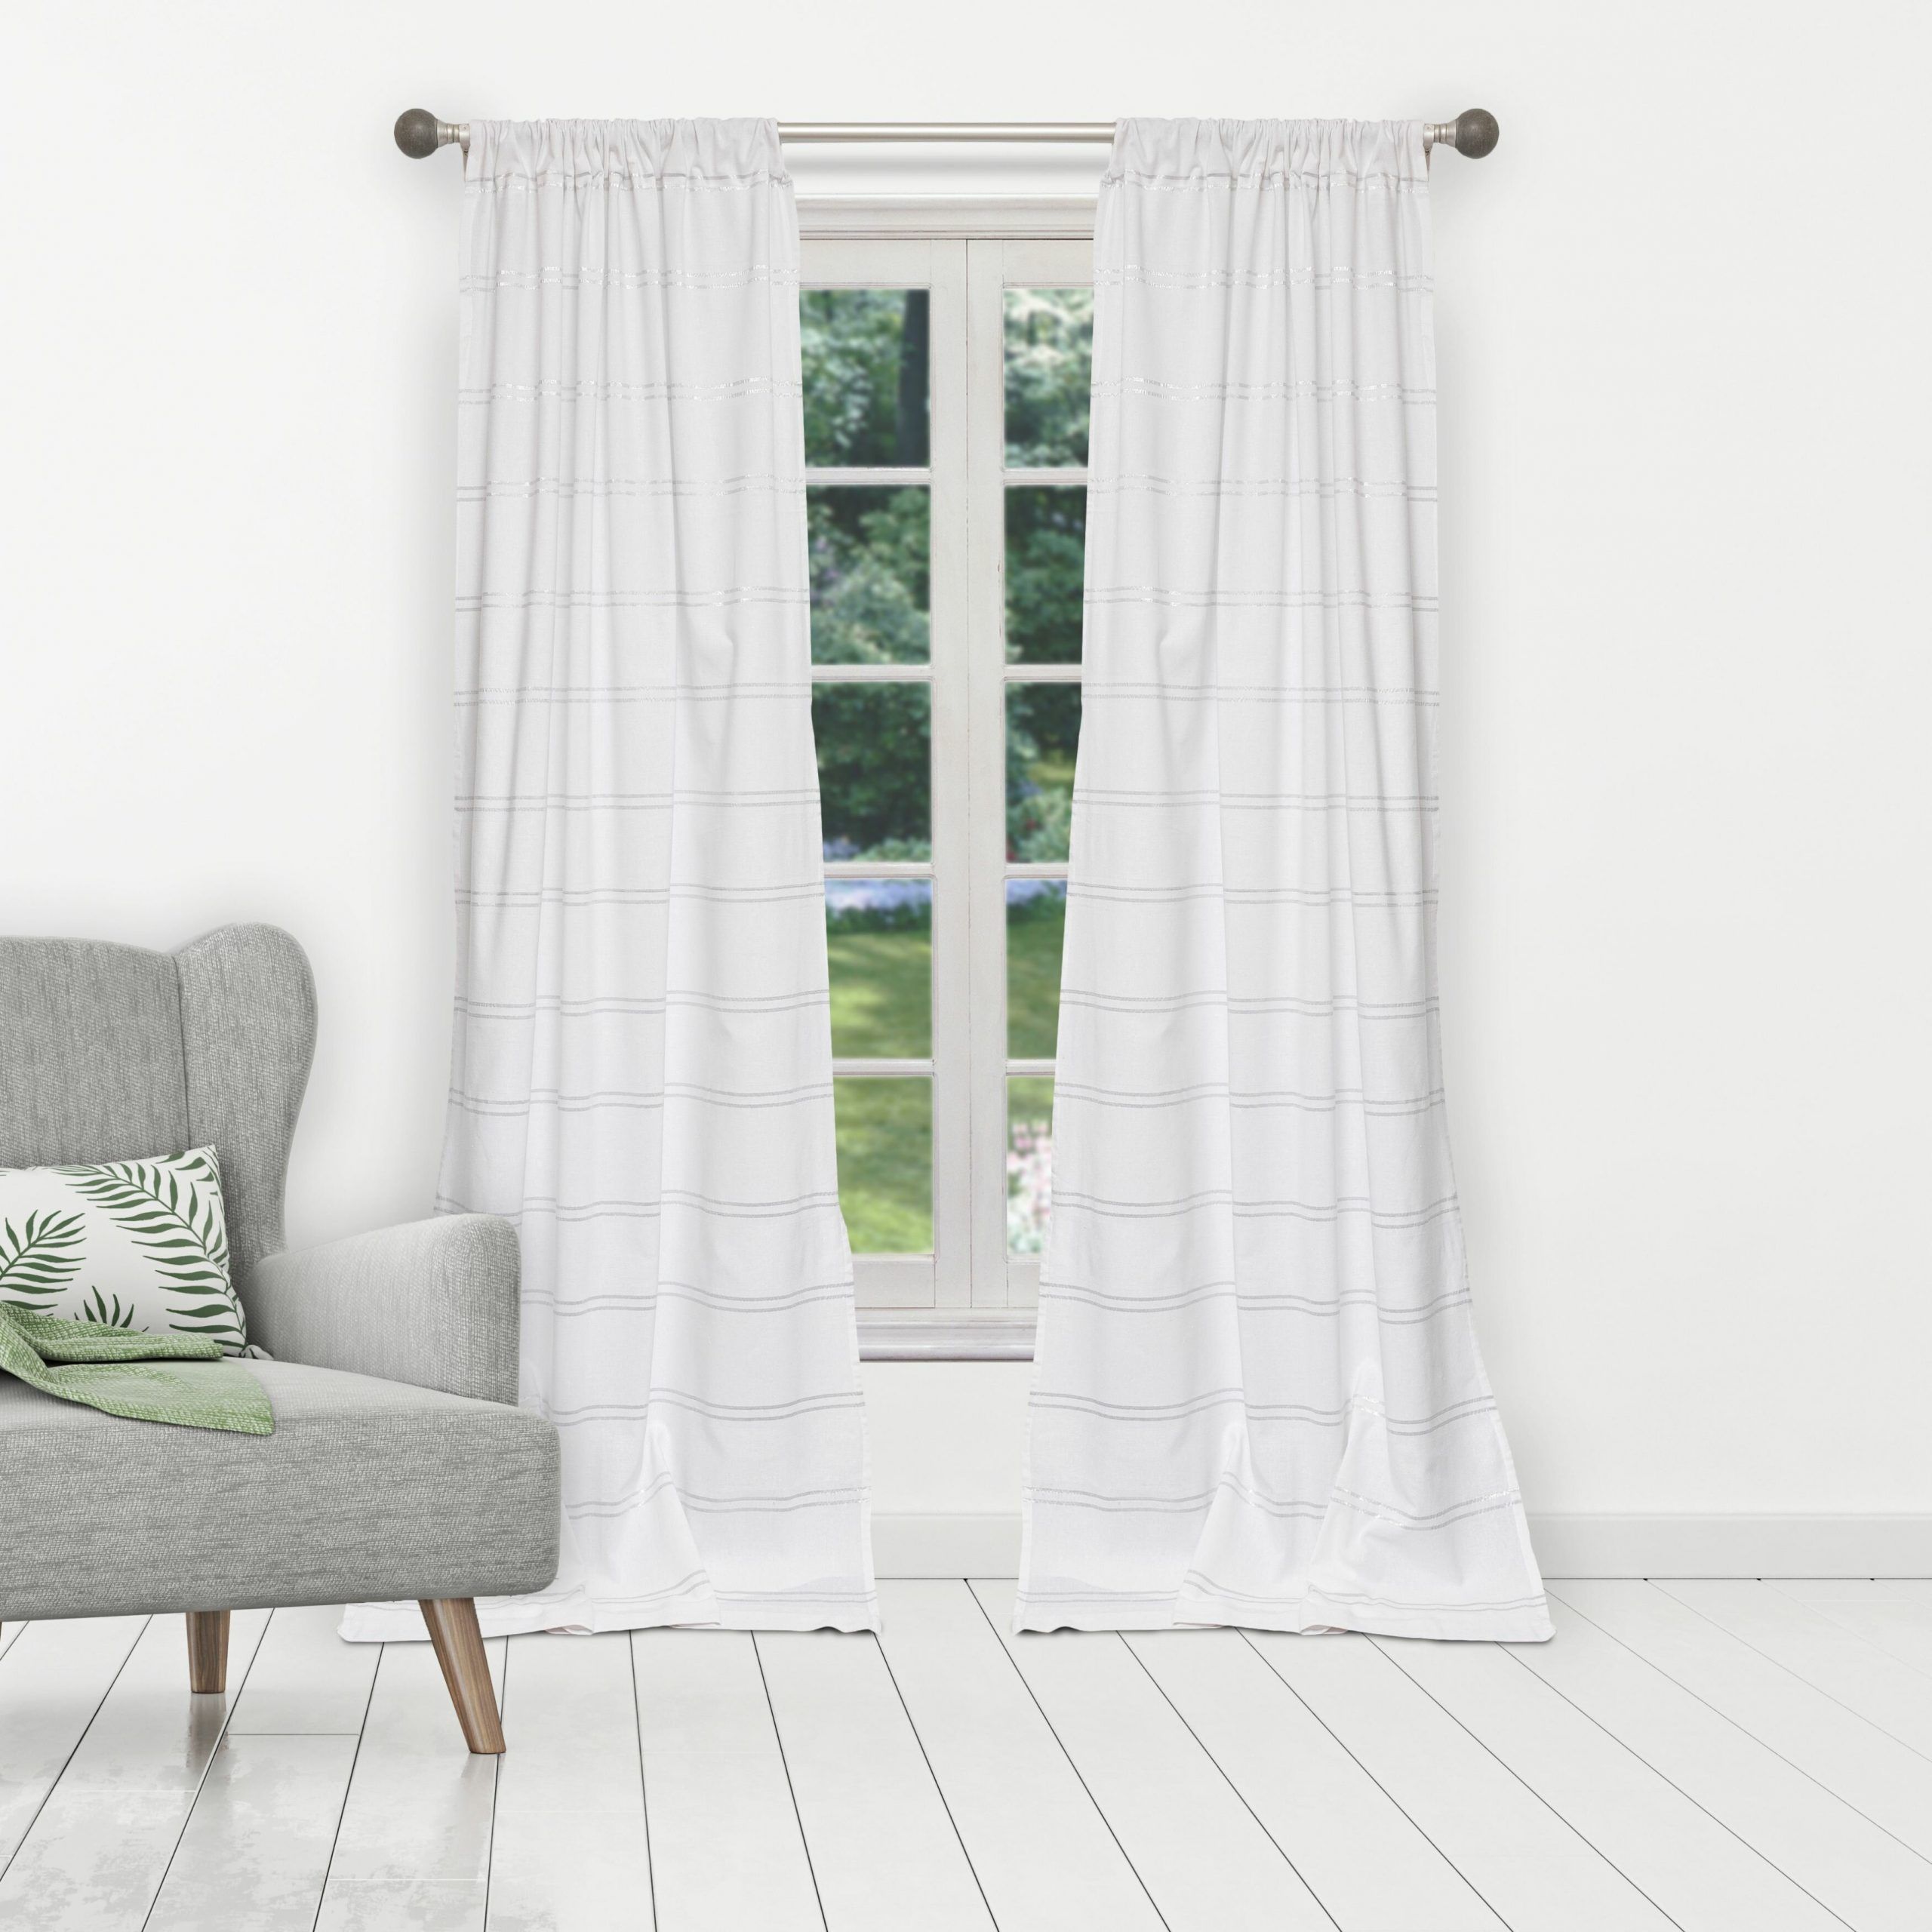 Calzada Pole Top Striped Room Darkening Thermal Rod Pocket Curtain Panels In White Micro Striped Semi Sheer Window Curtain Pieces (View 16 of 20)